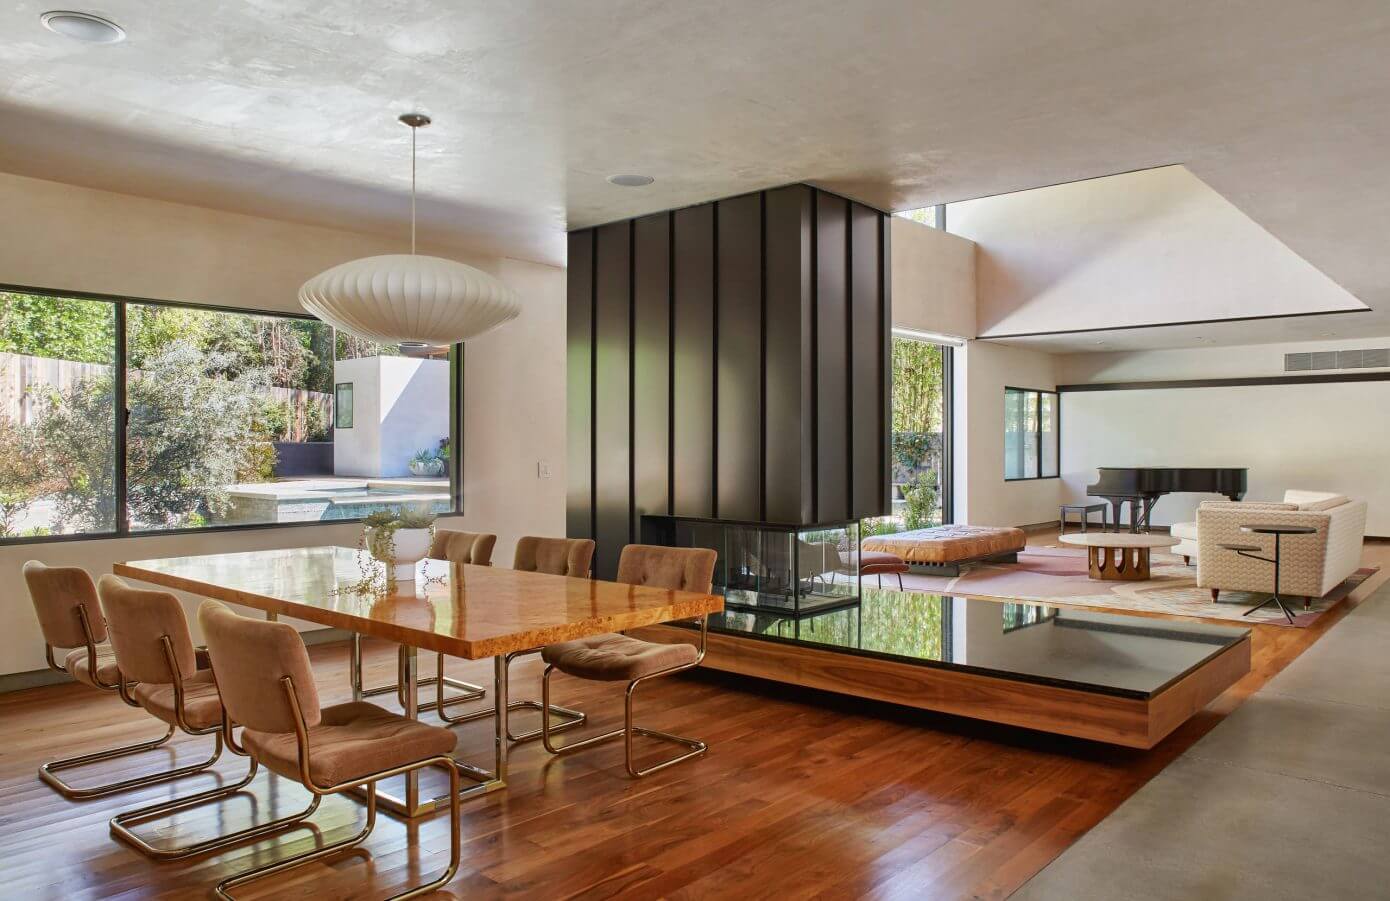 Mandeville Canyon Home by Jesse Bornstein